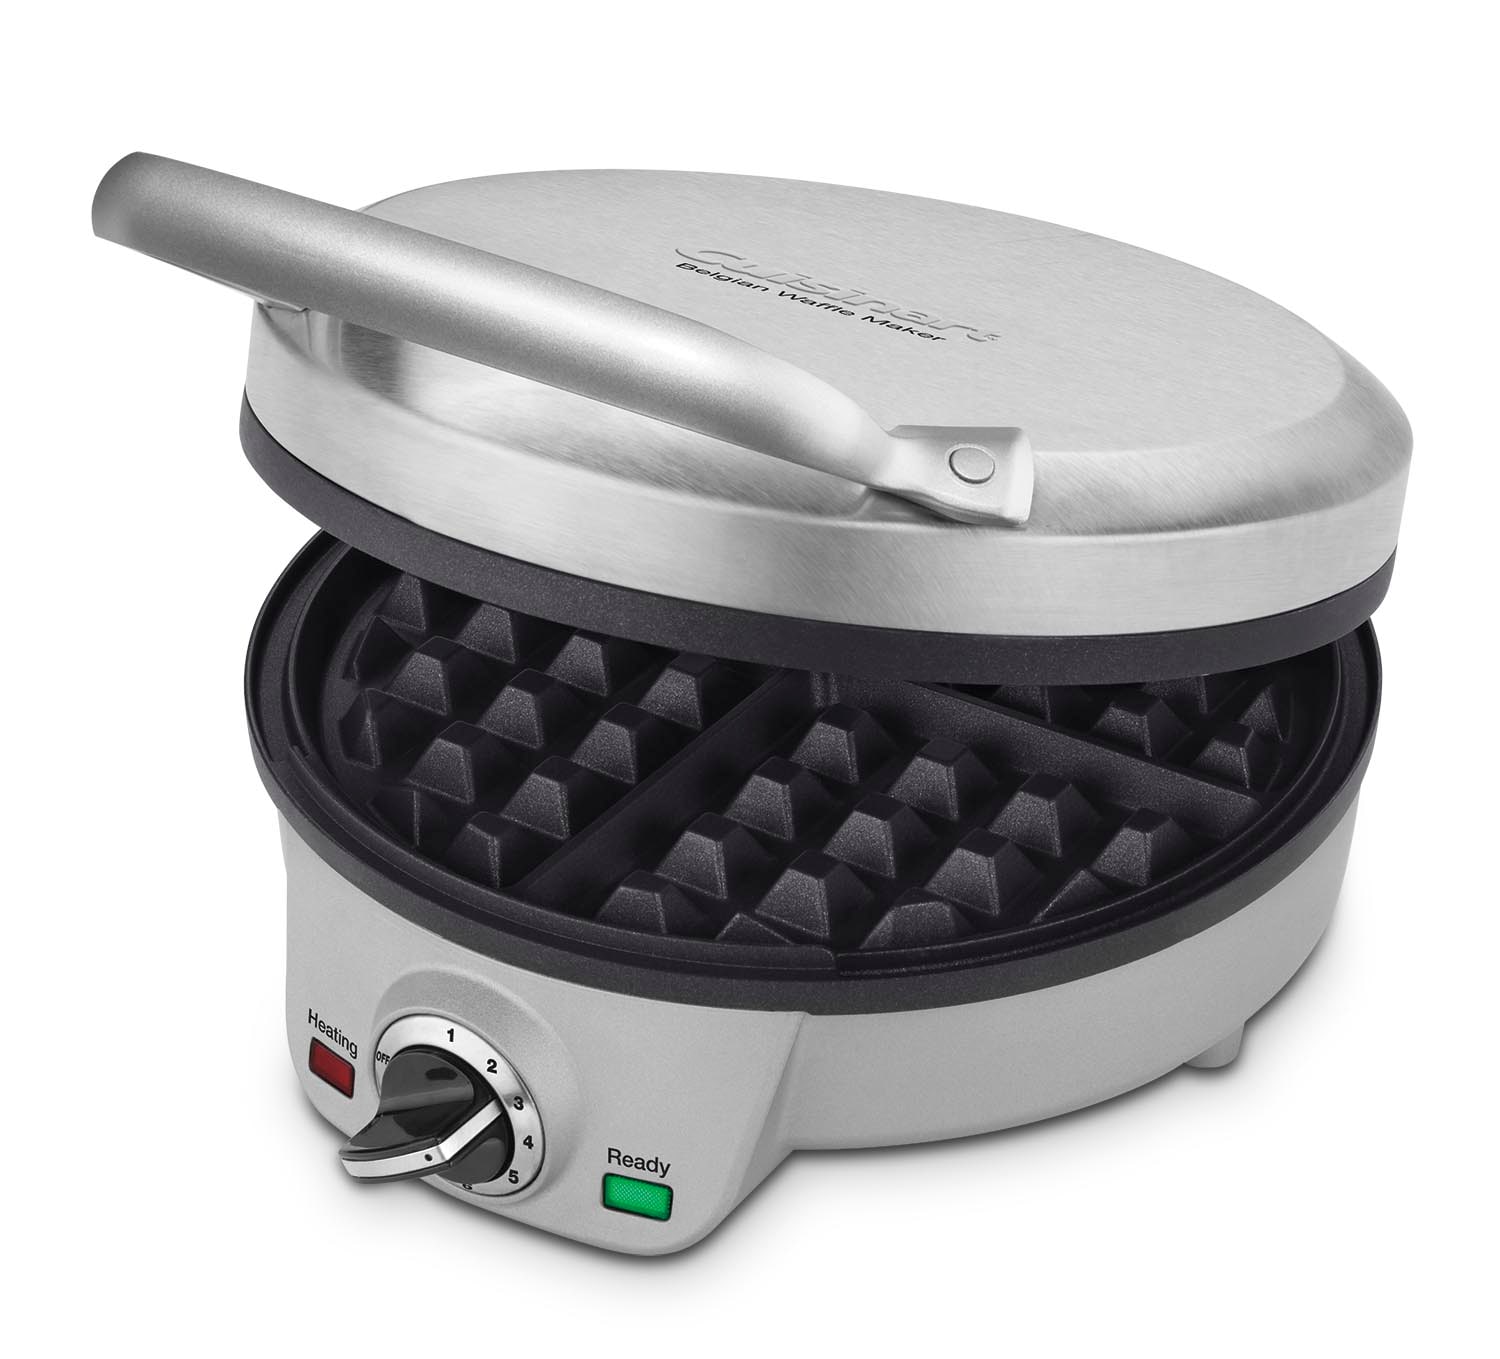 Chefman Stainless Steel Mini Waffle Maker, Knob Control, cETLus Safety  Listed, 1400W, Round Shape, Non-Stick, Mess-Free, Locking Lid